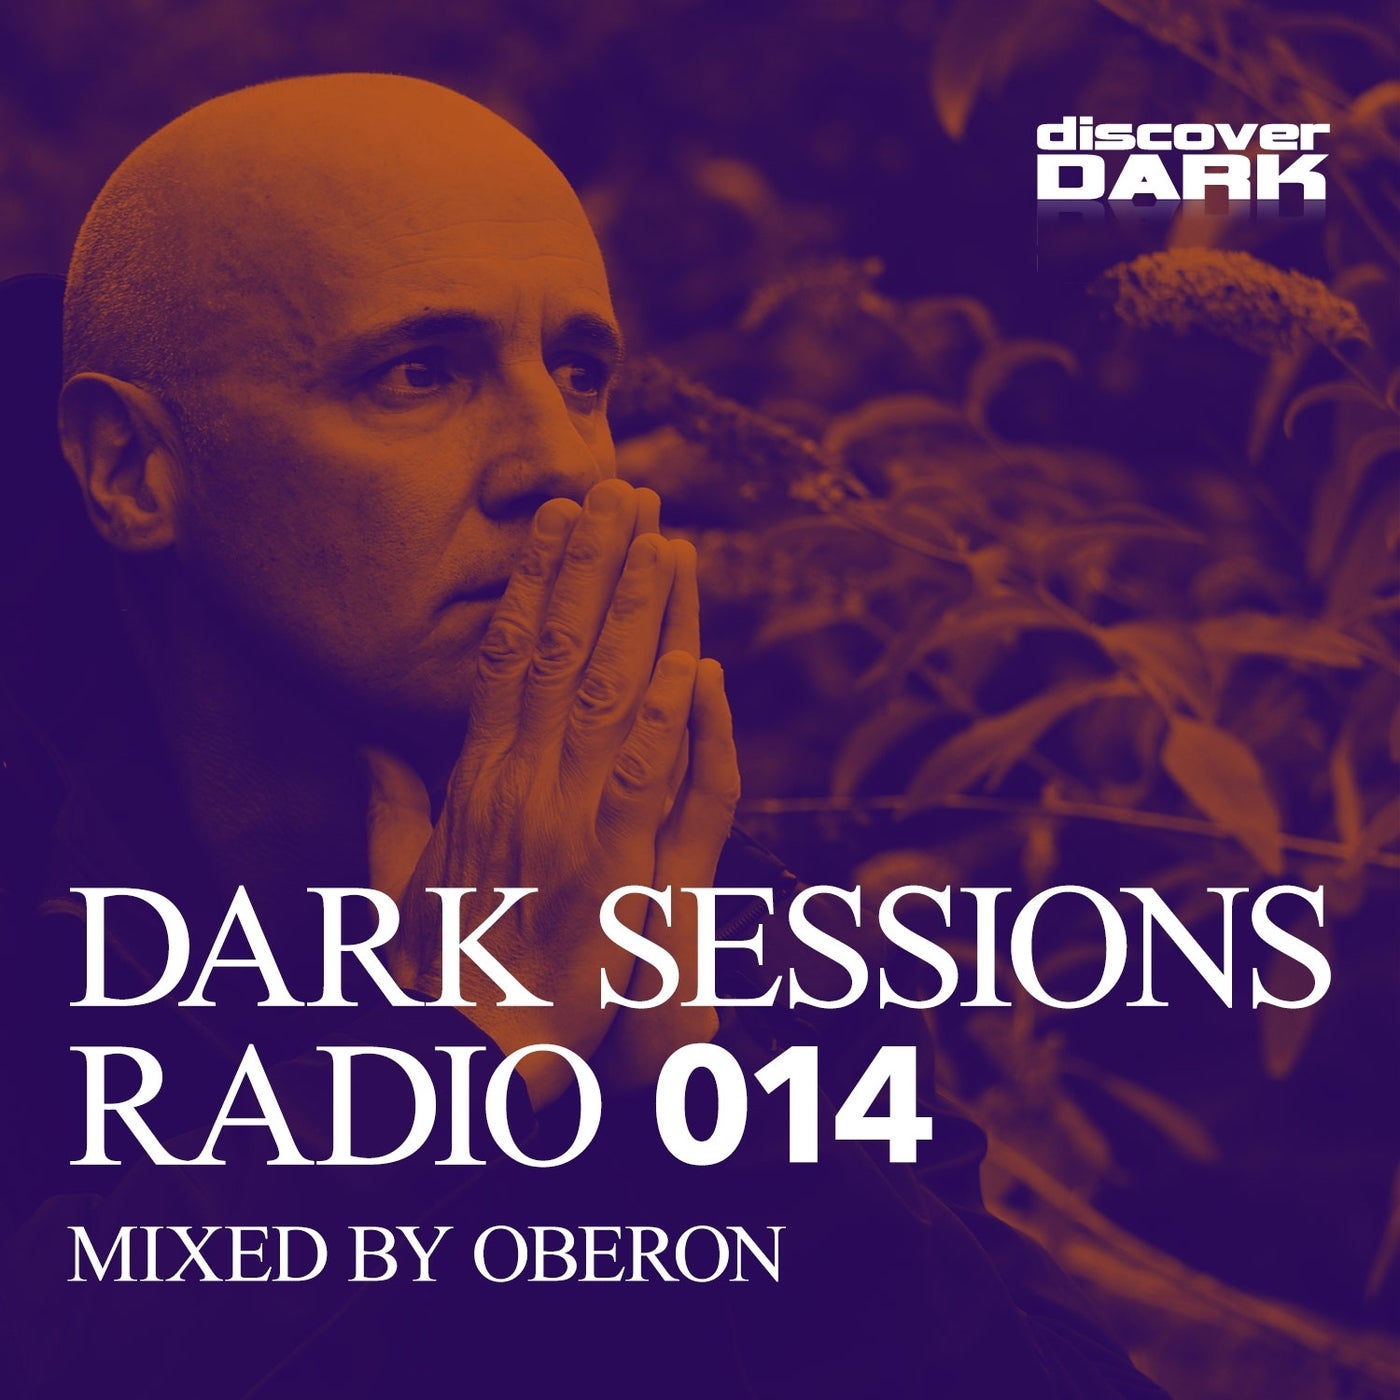 Dark Sessions Radio 014 (Mixed by Oberon)